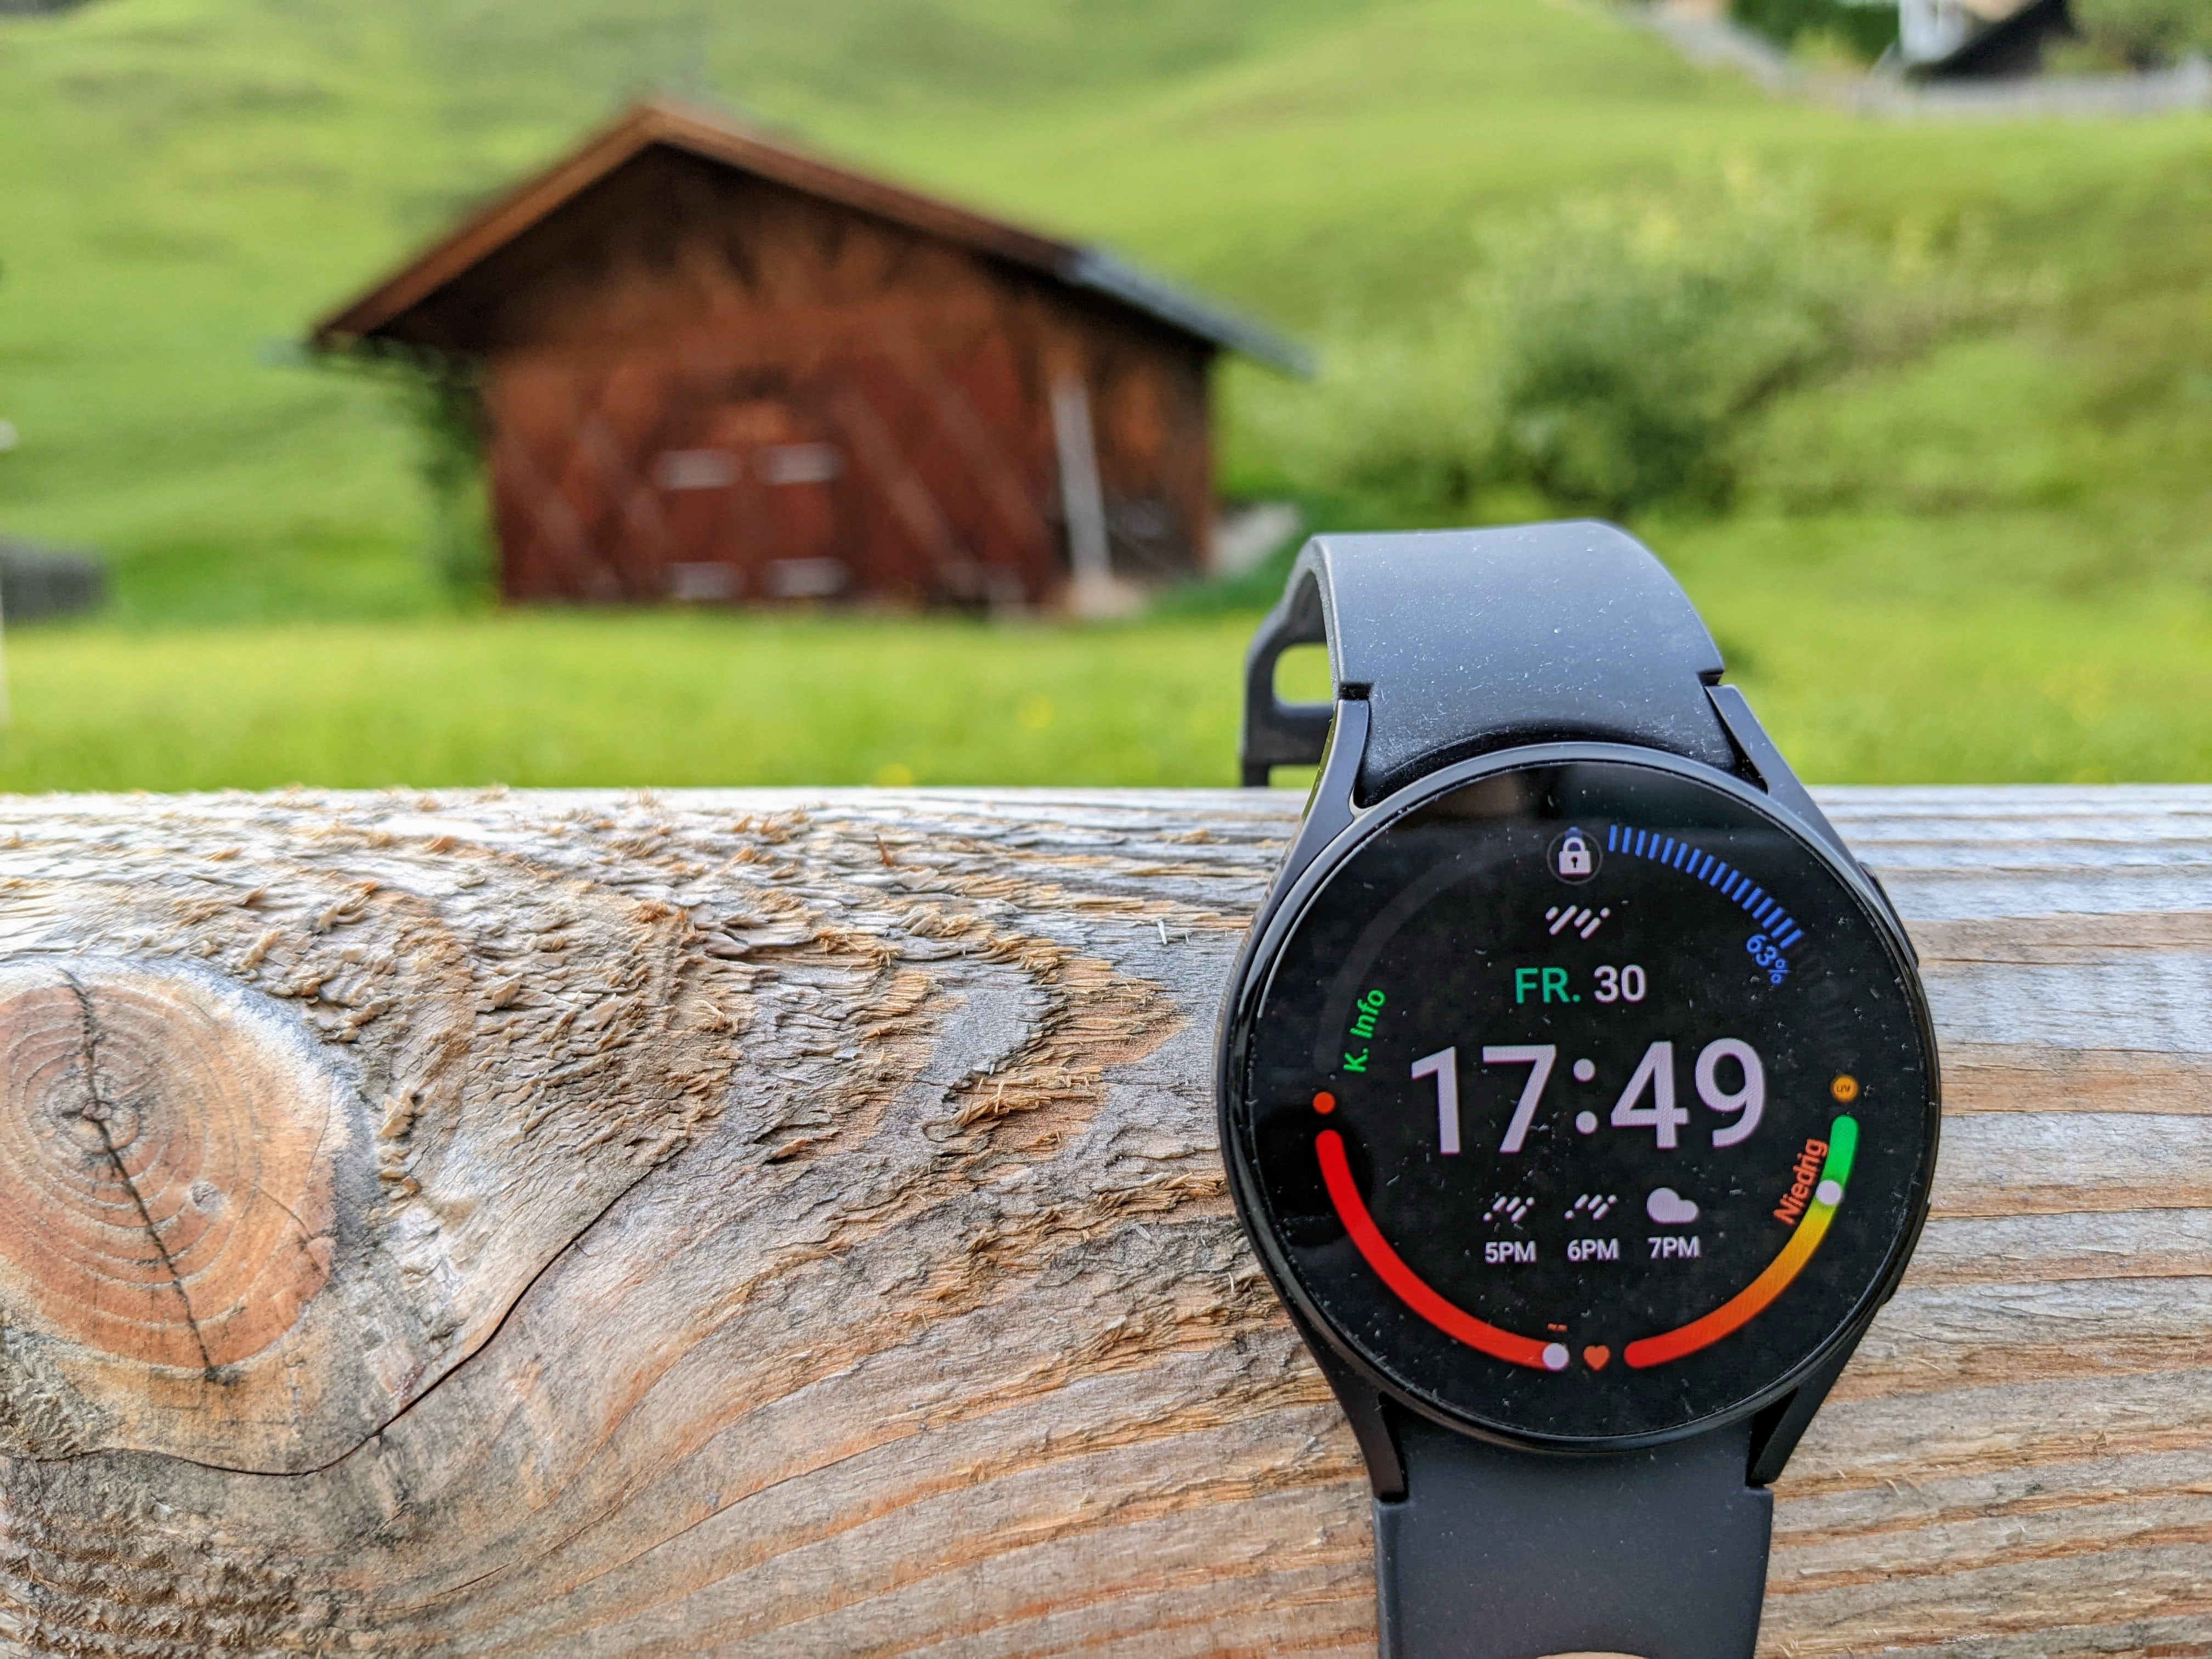 Samsung Galaxy Watch5 and Watch5 Pro review: Design and controls